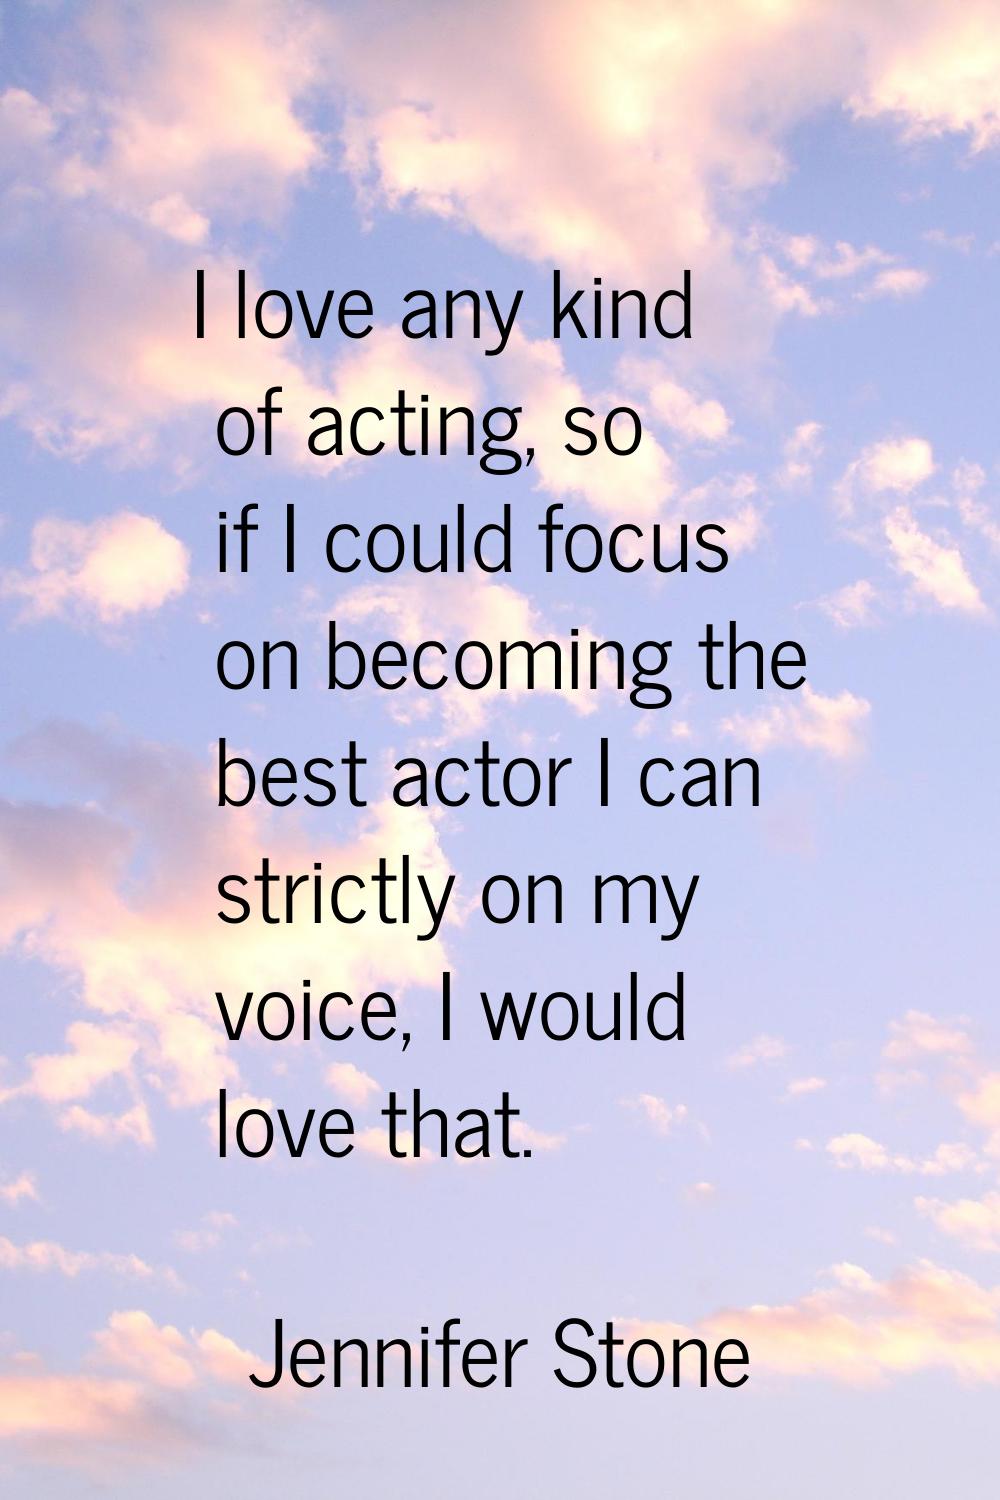 I love any kind of acting, so if I could focus on becoming the best actor I can strictly on my voic